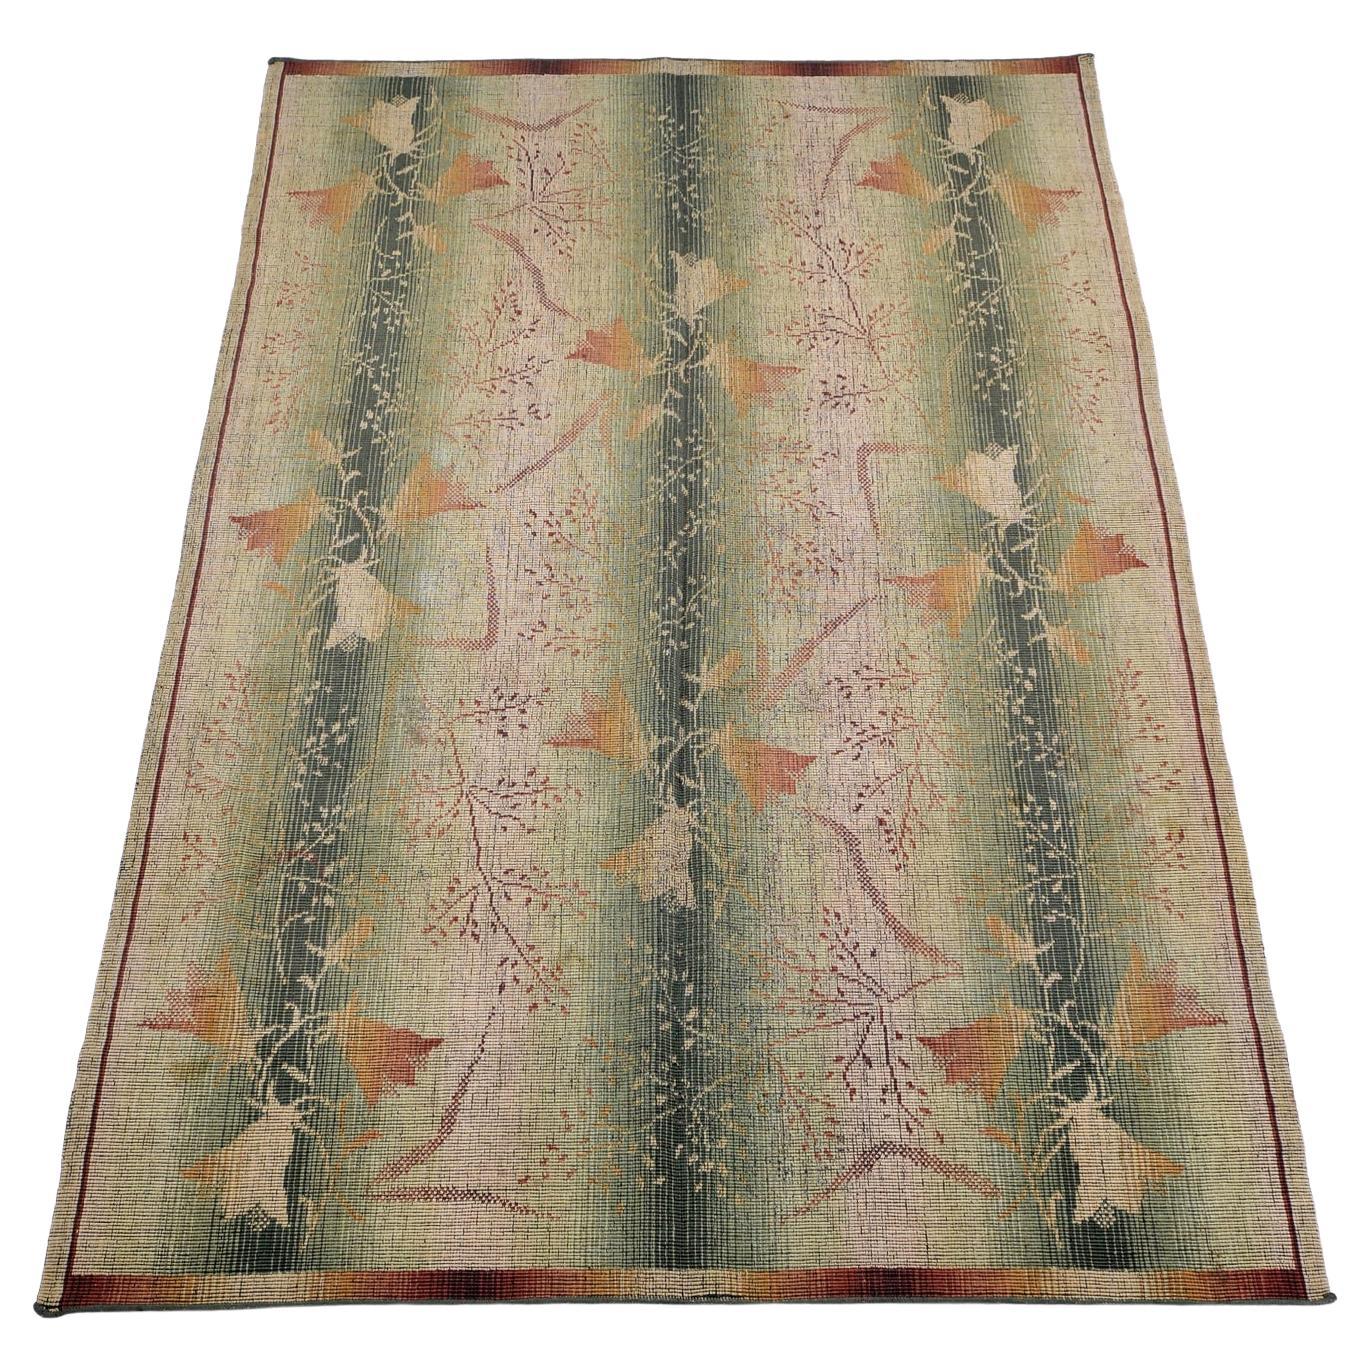 Art Déco Flat-Woven Rug, Hand Knotted, Floral Decoration, Belgium, circa 1920